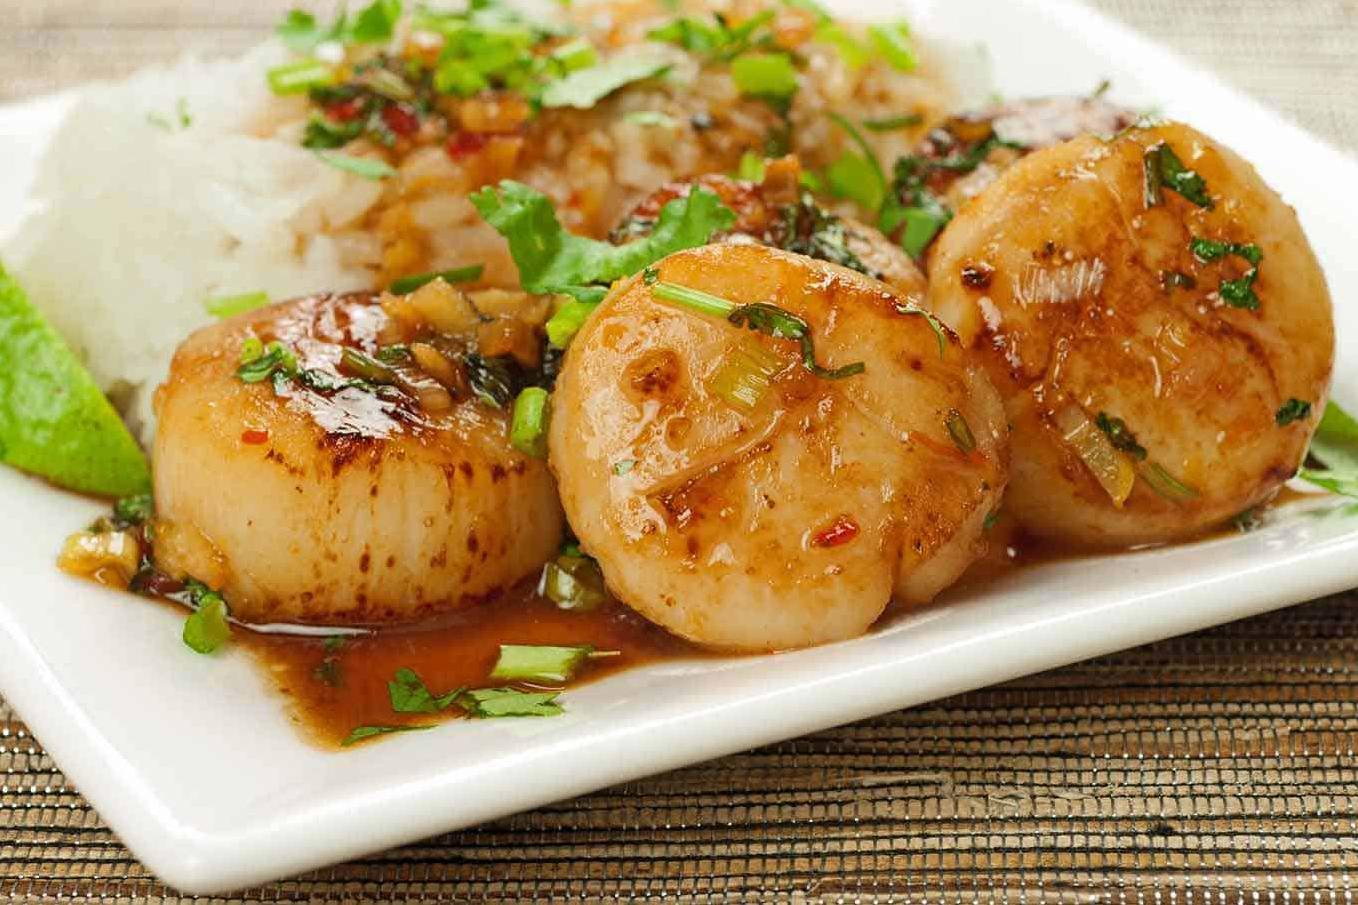  Fresh Scallops: Fresh scallops are a must for this recipe, ensuring a tender and flavorful taste.